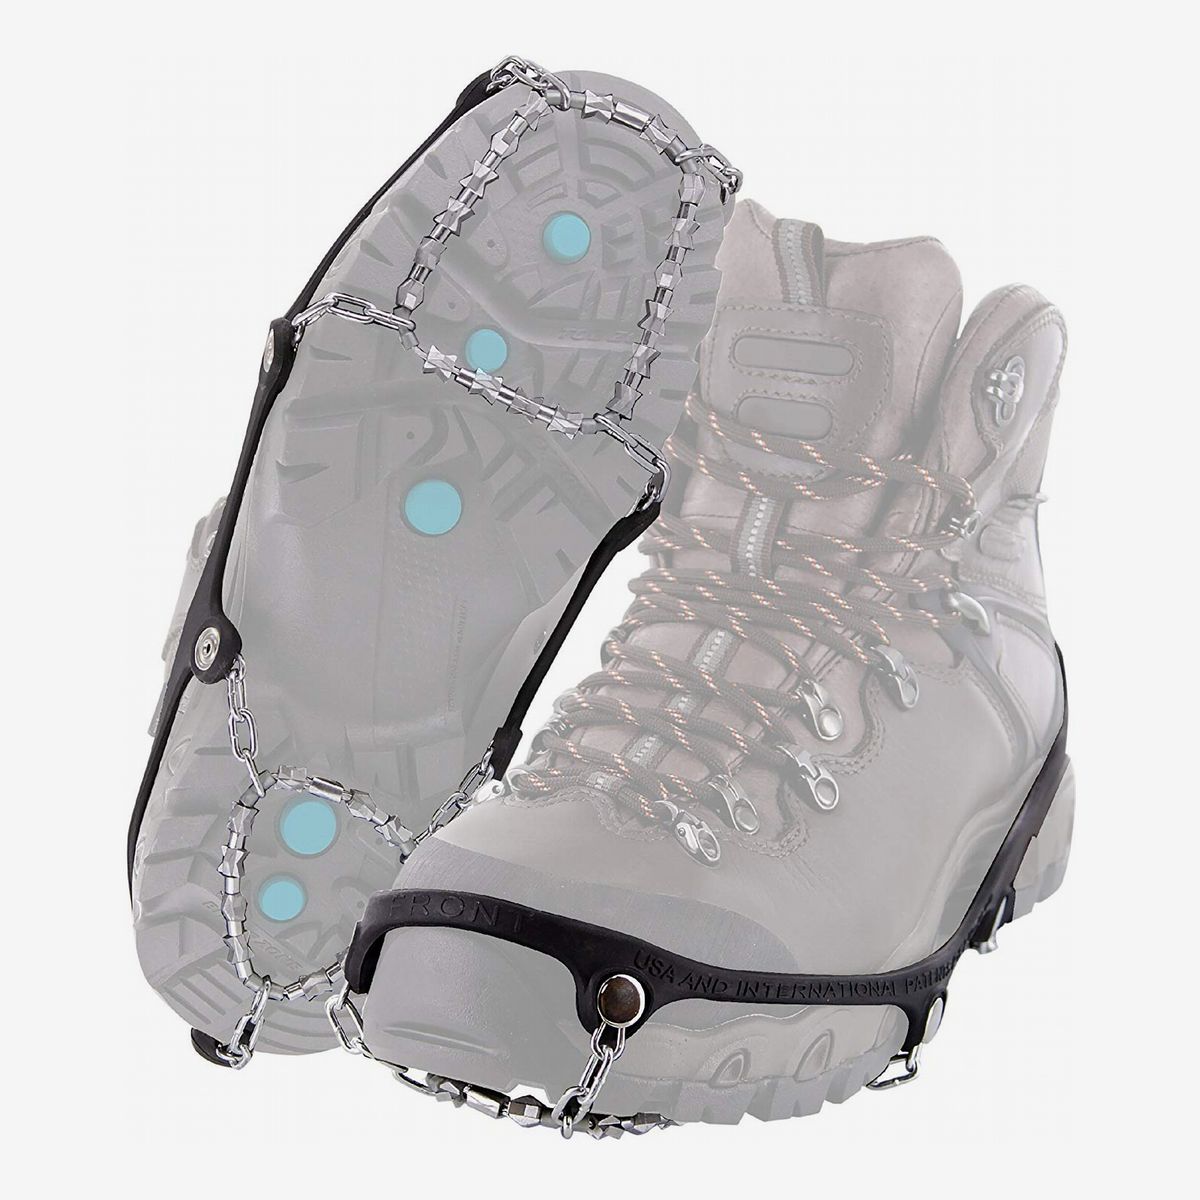 STABILicers Hike Macro Traction Ice Cleat for Hiking in Snow and Ice 1 Pair 